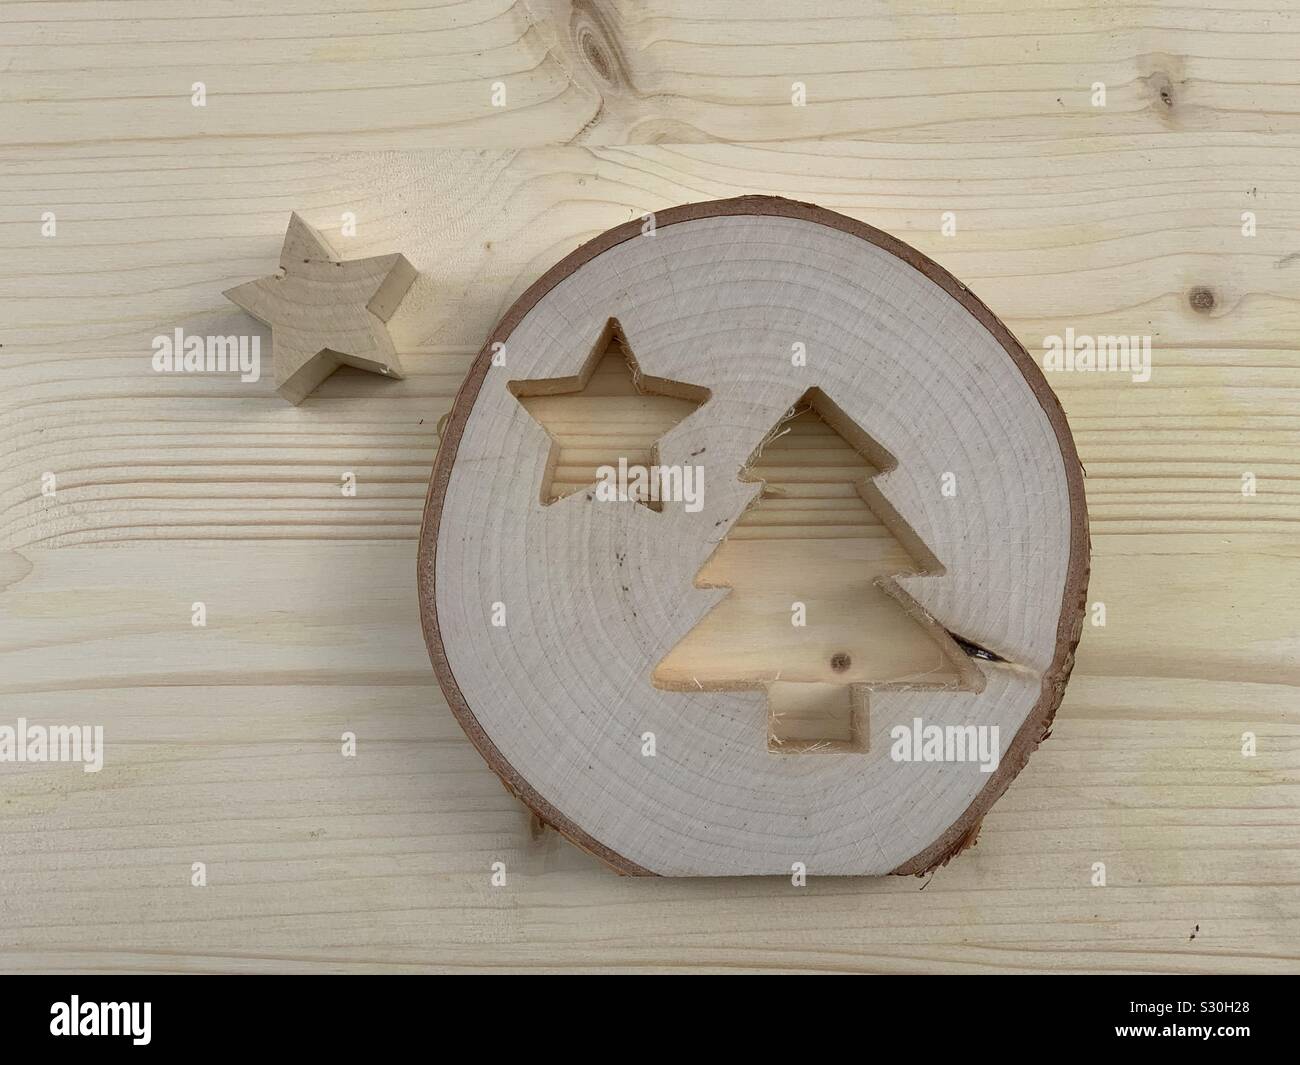 Christmas time concept with a creative wooden art Stock Photo